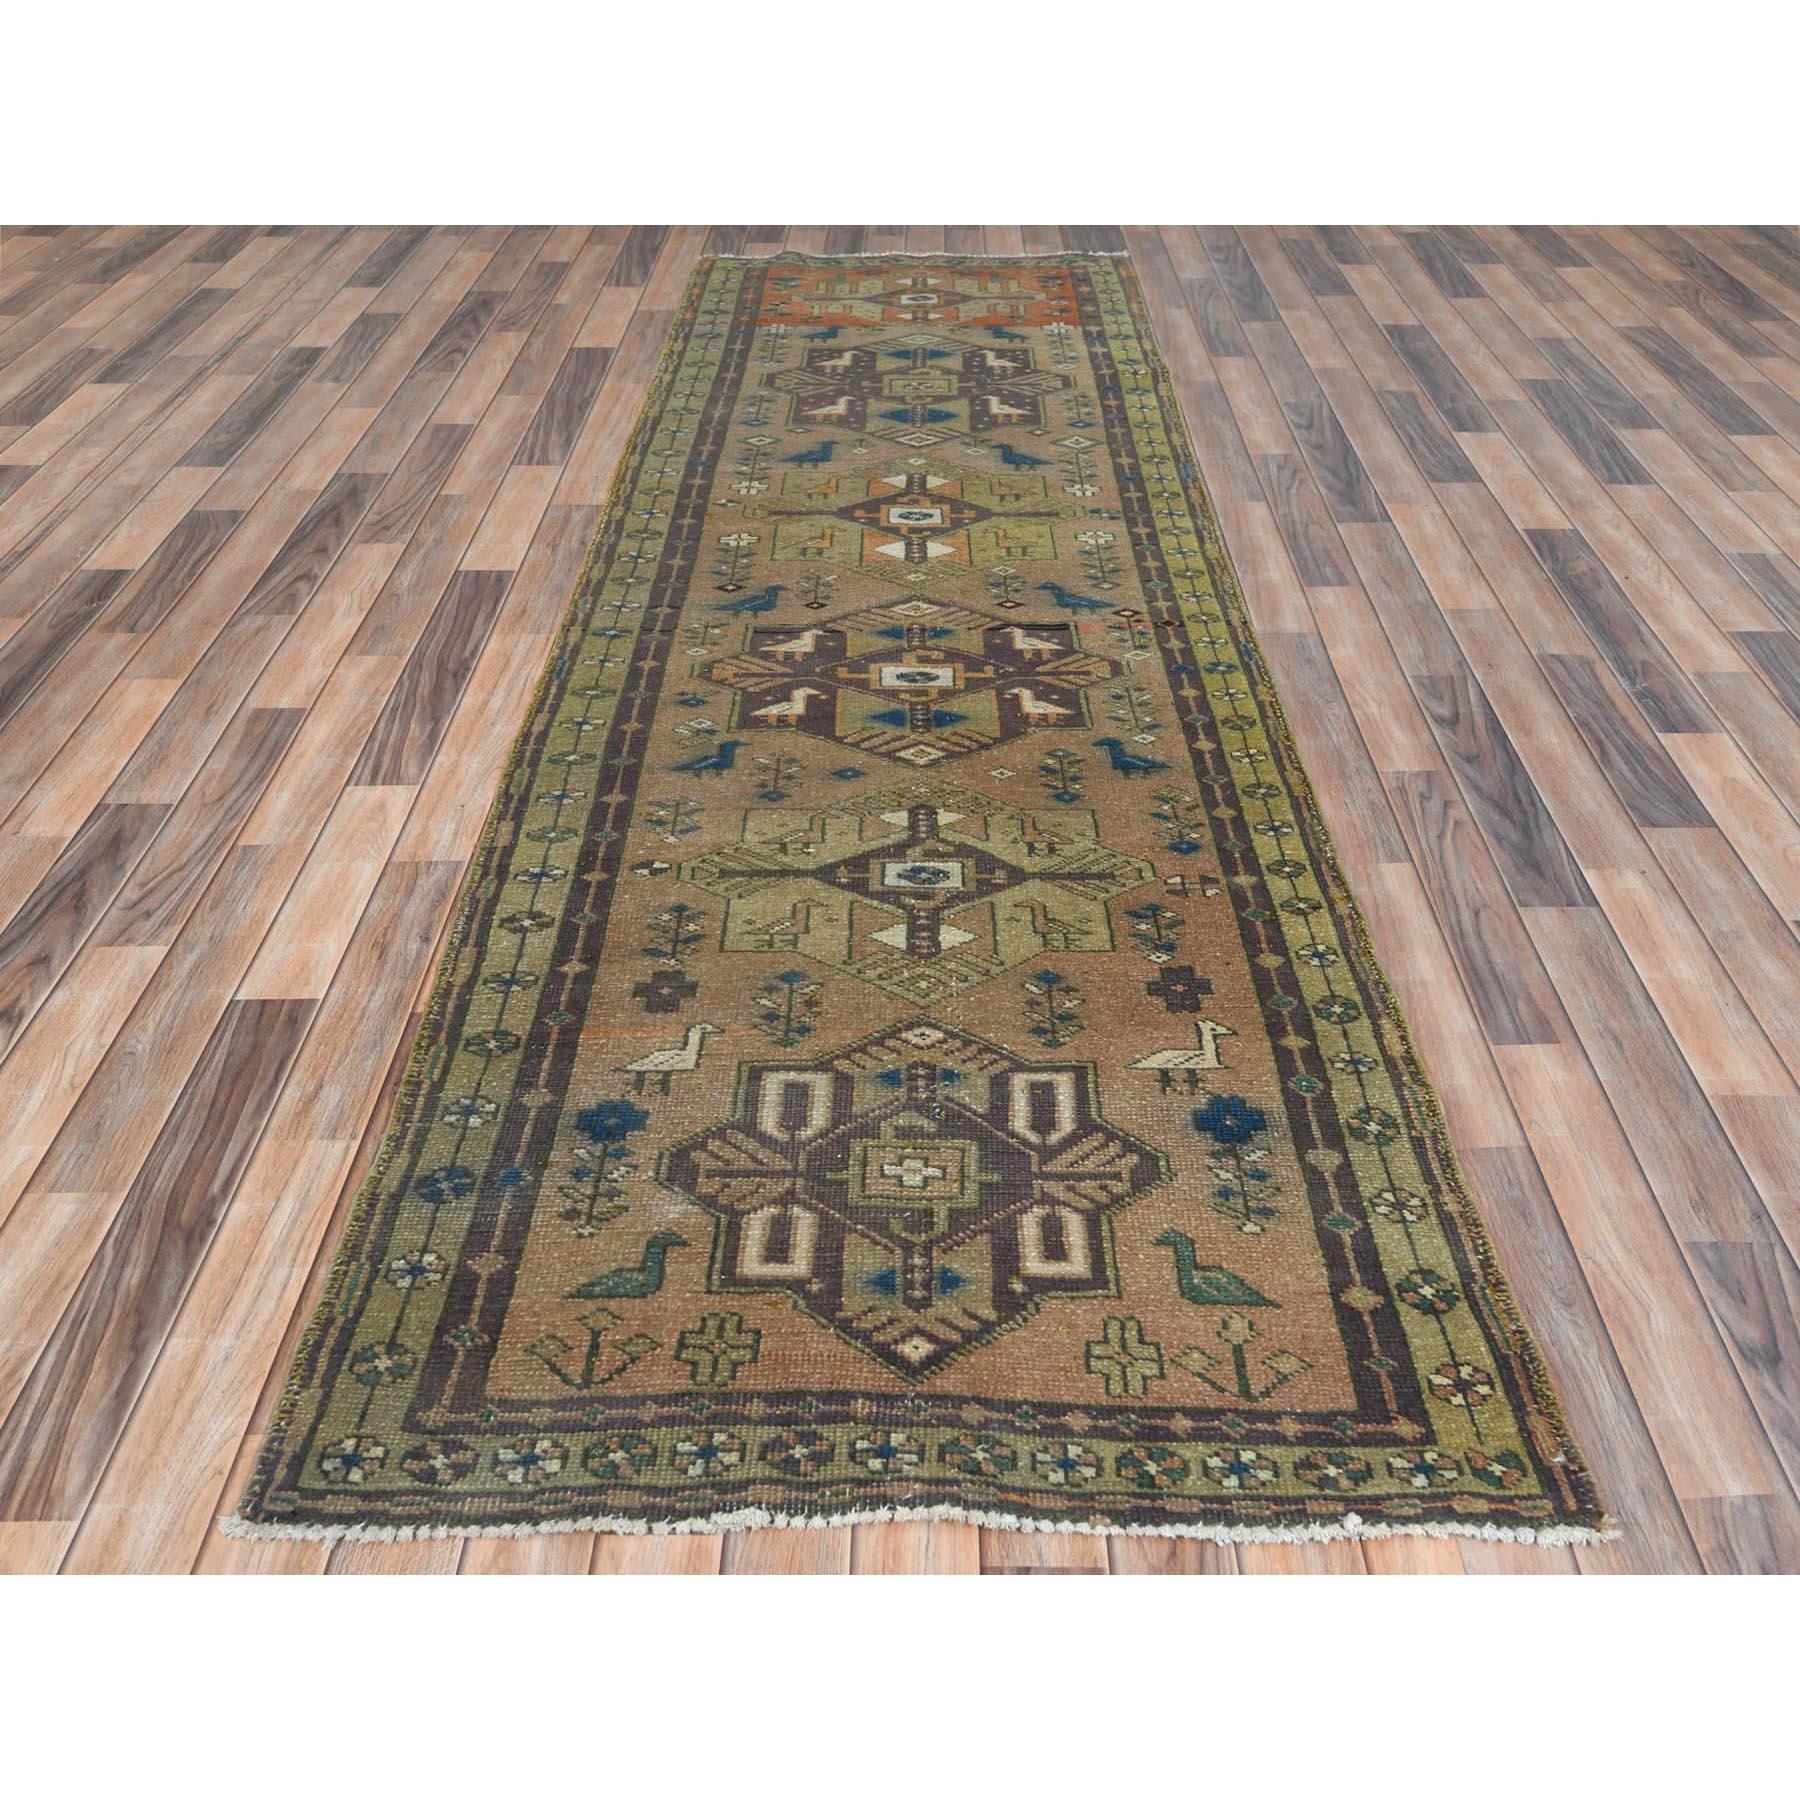 This fabulous hand-knotted carpet has been created and designed for extra strength and durability. This rug has been handcrafted for weeks in the traditional method that is used to make
Exact Rug Size in Feet and Inches : 3'4